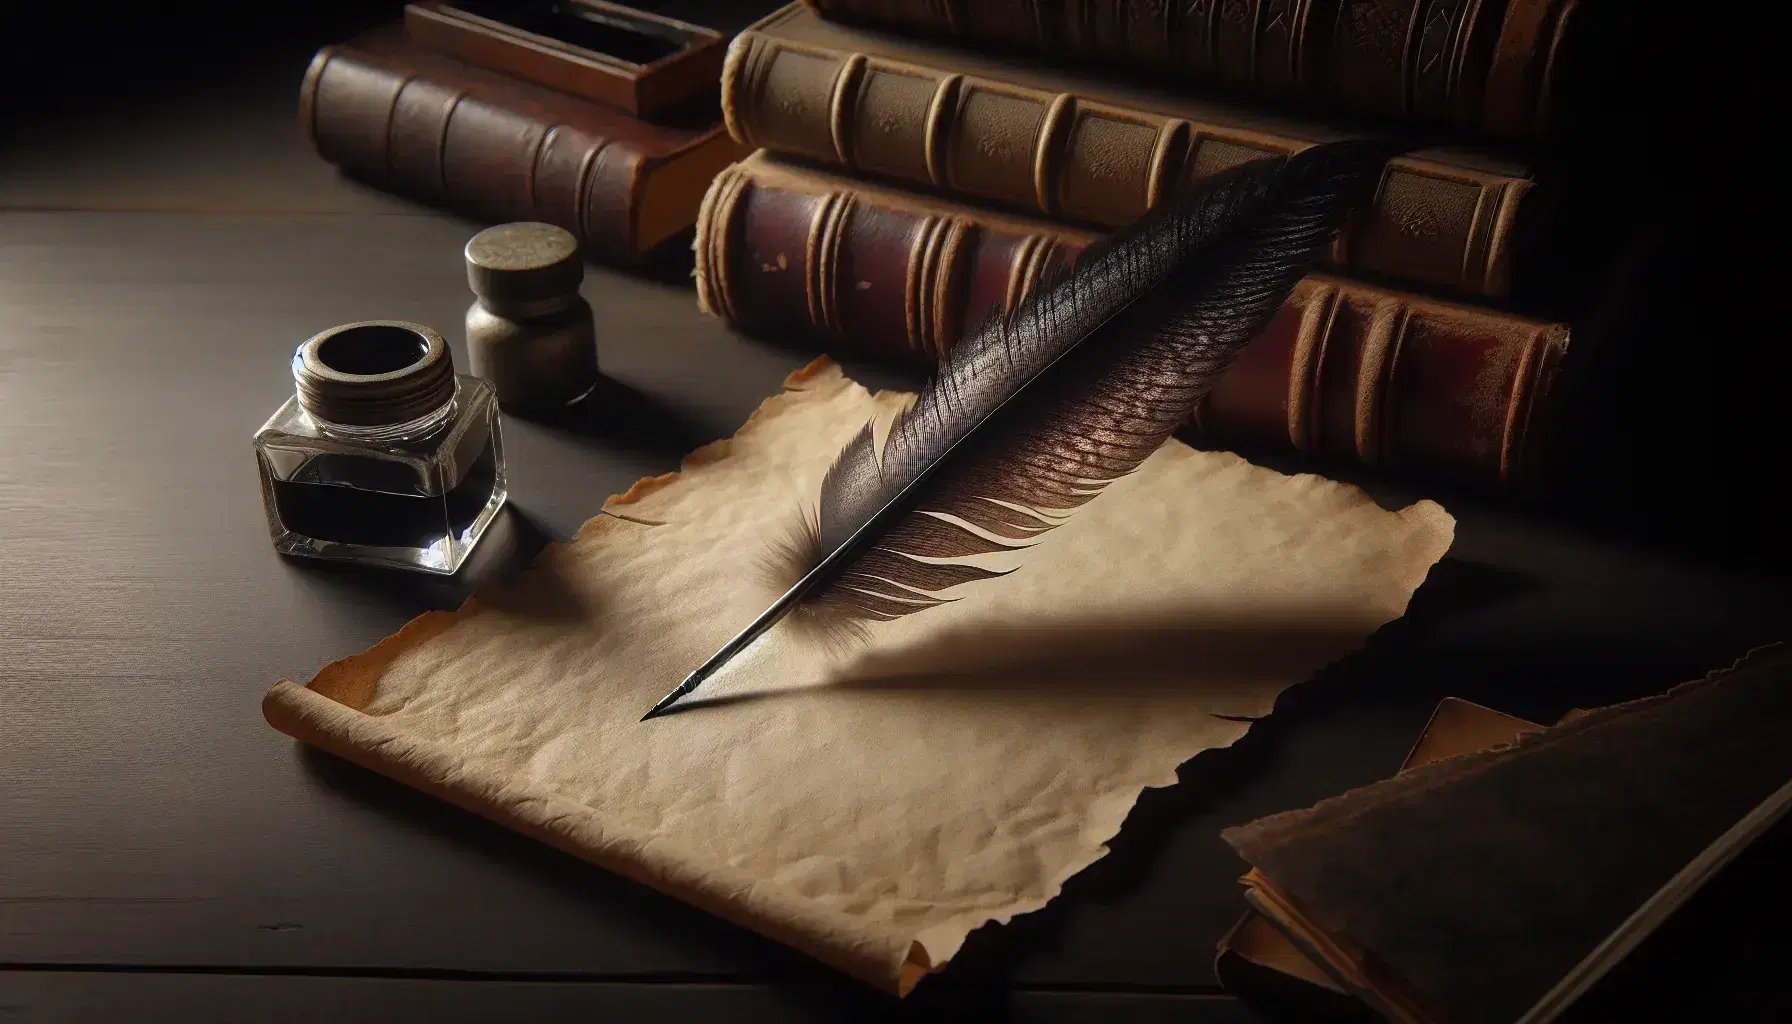 Quill pen on blank handmade parchment with curled edge, beside a half-filled inkwell on a dark wooden desk, with blurred leather-bound books in the background.